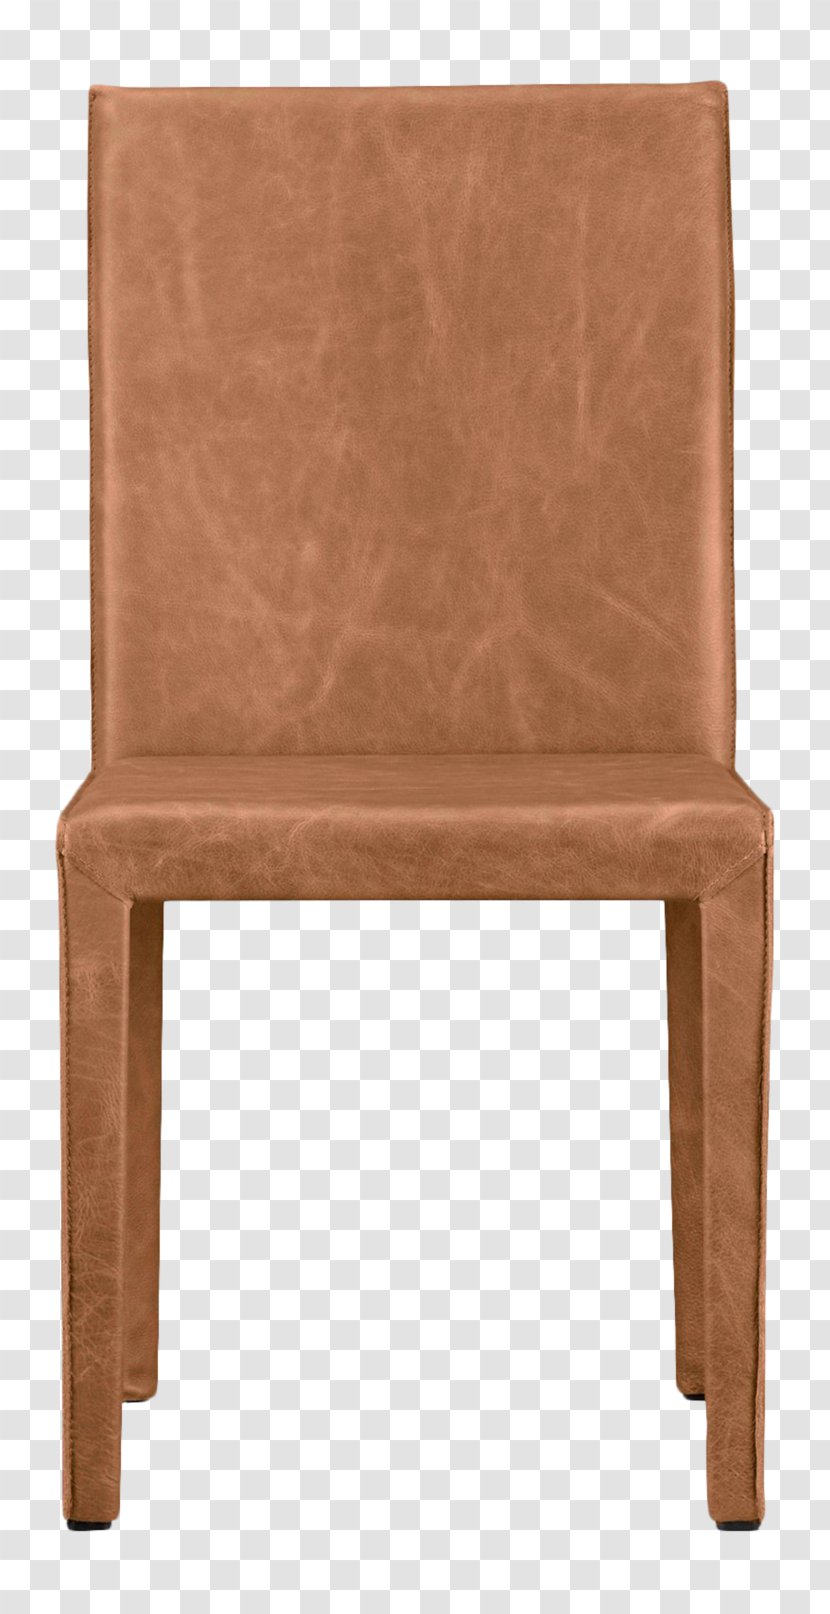 Table Dining Room Chair Furniture - Concrete Cb2 Transparent PNG